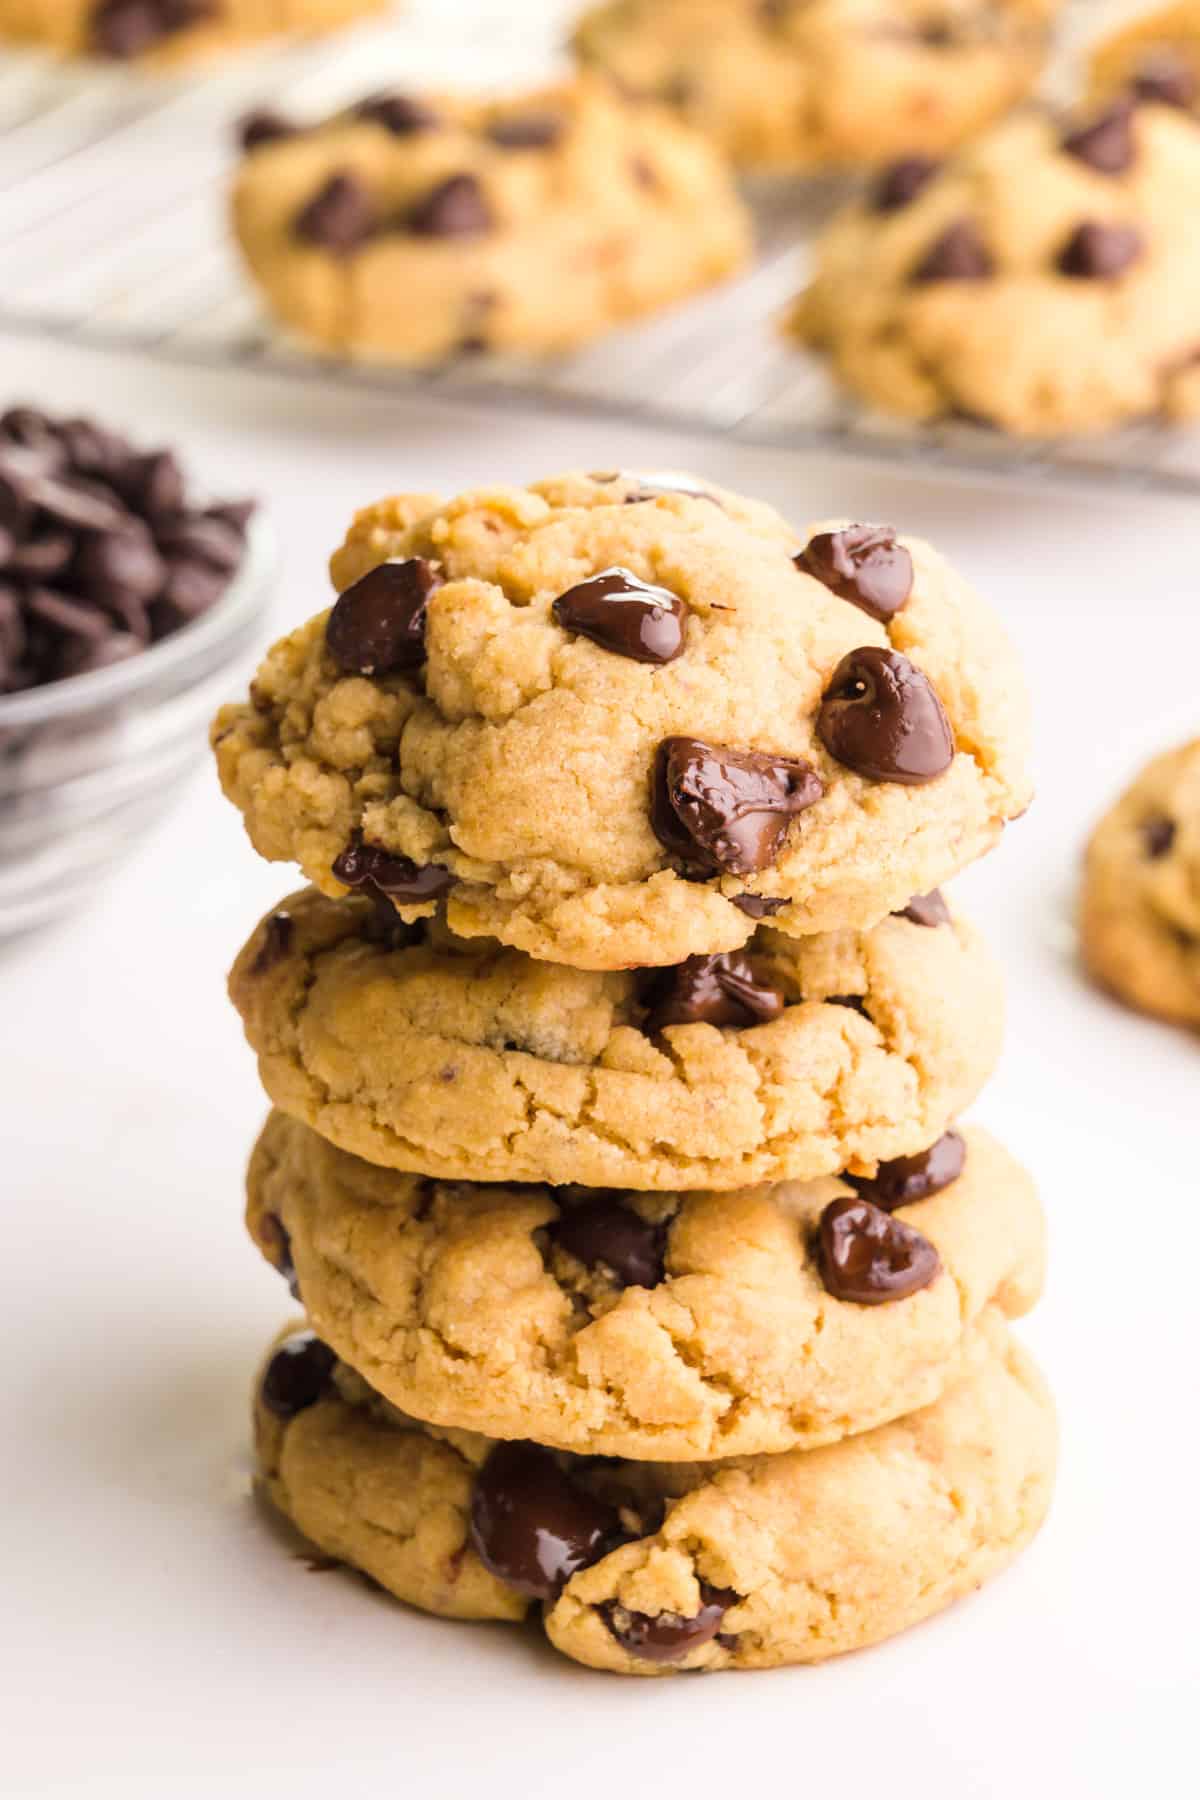 A stack of vegan peanut butter chocolate chip cookies next to a bowl of chocolate chips and more cookies in the background.